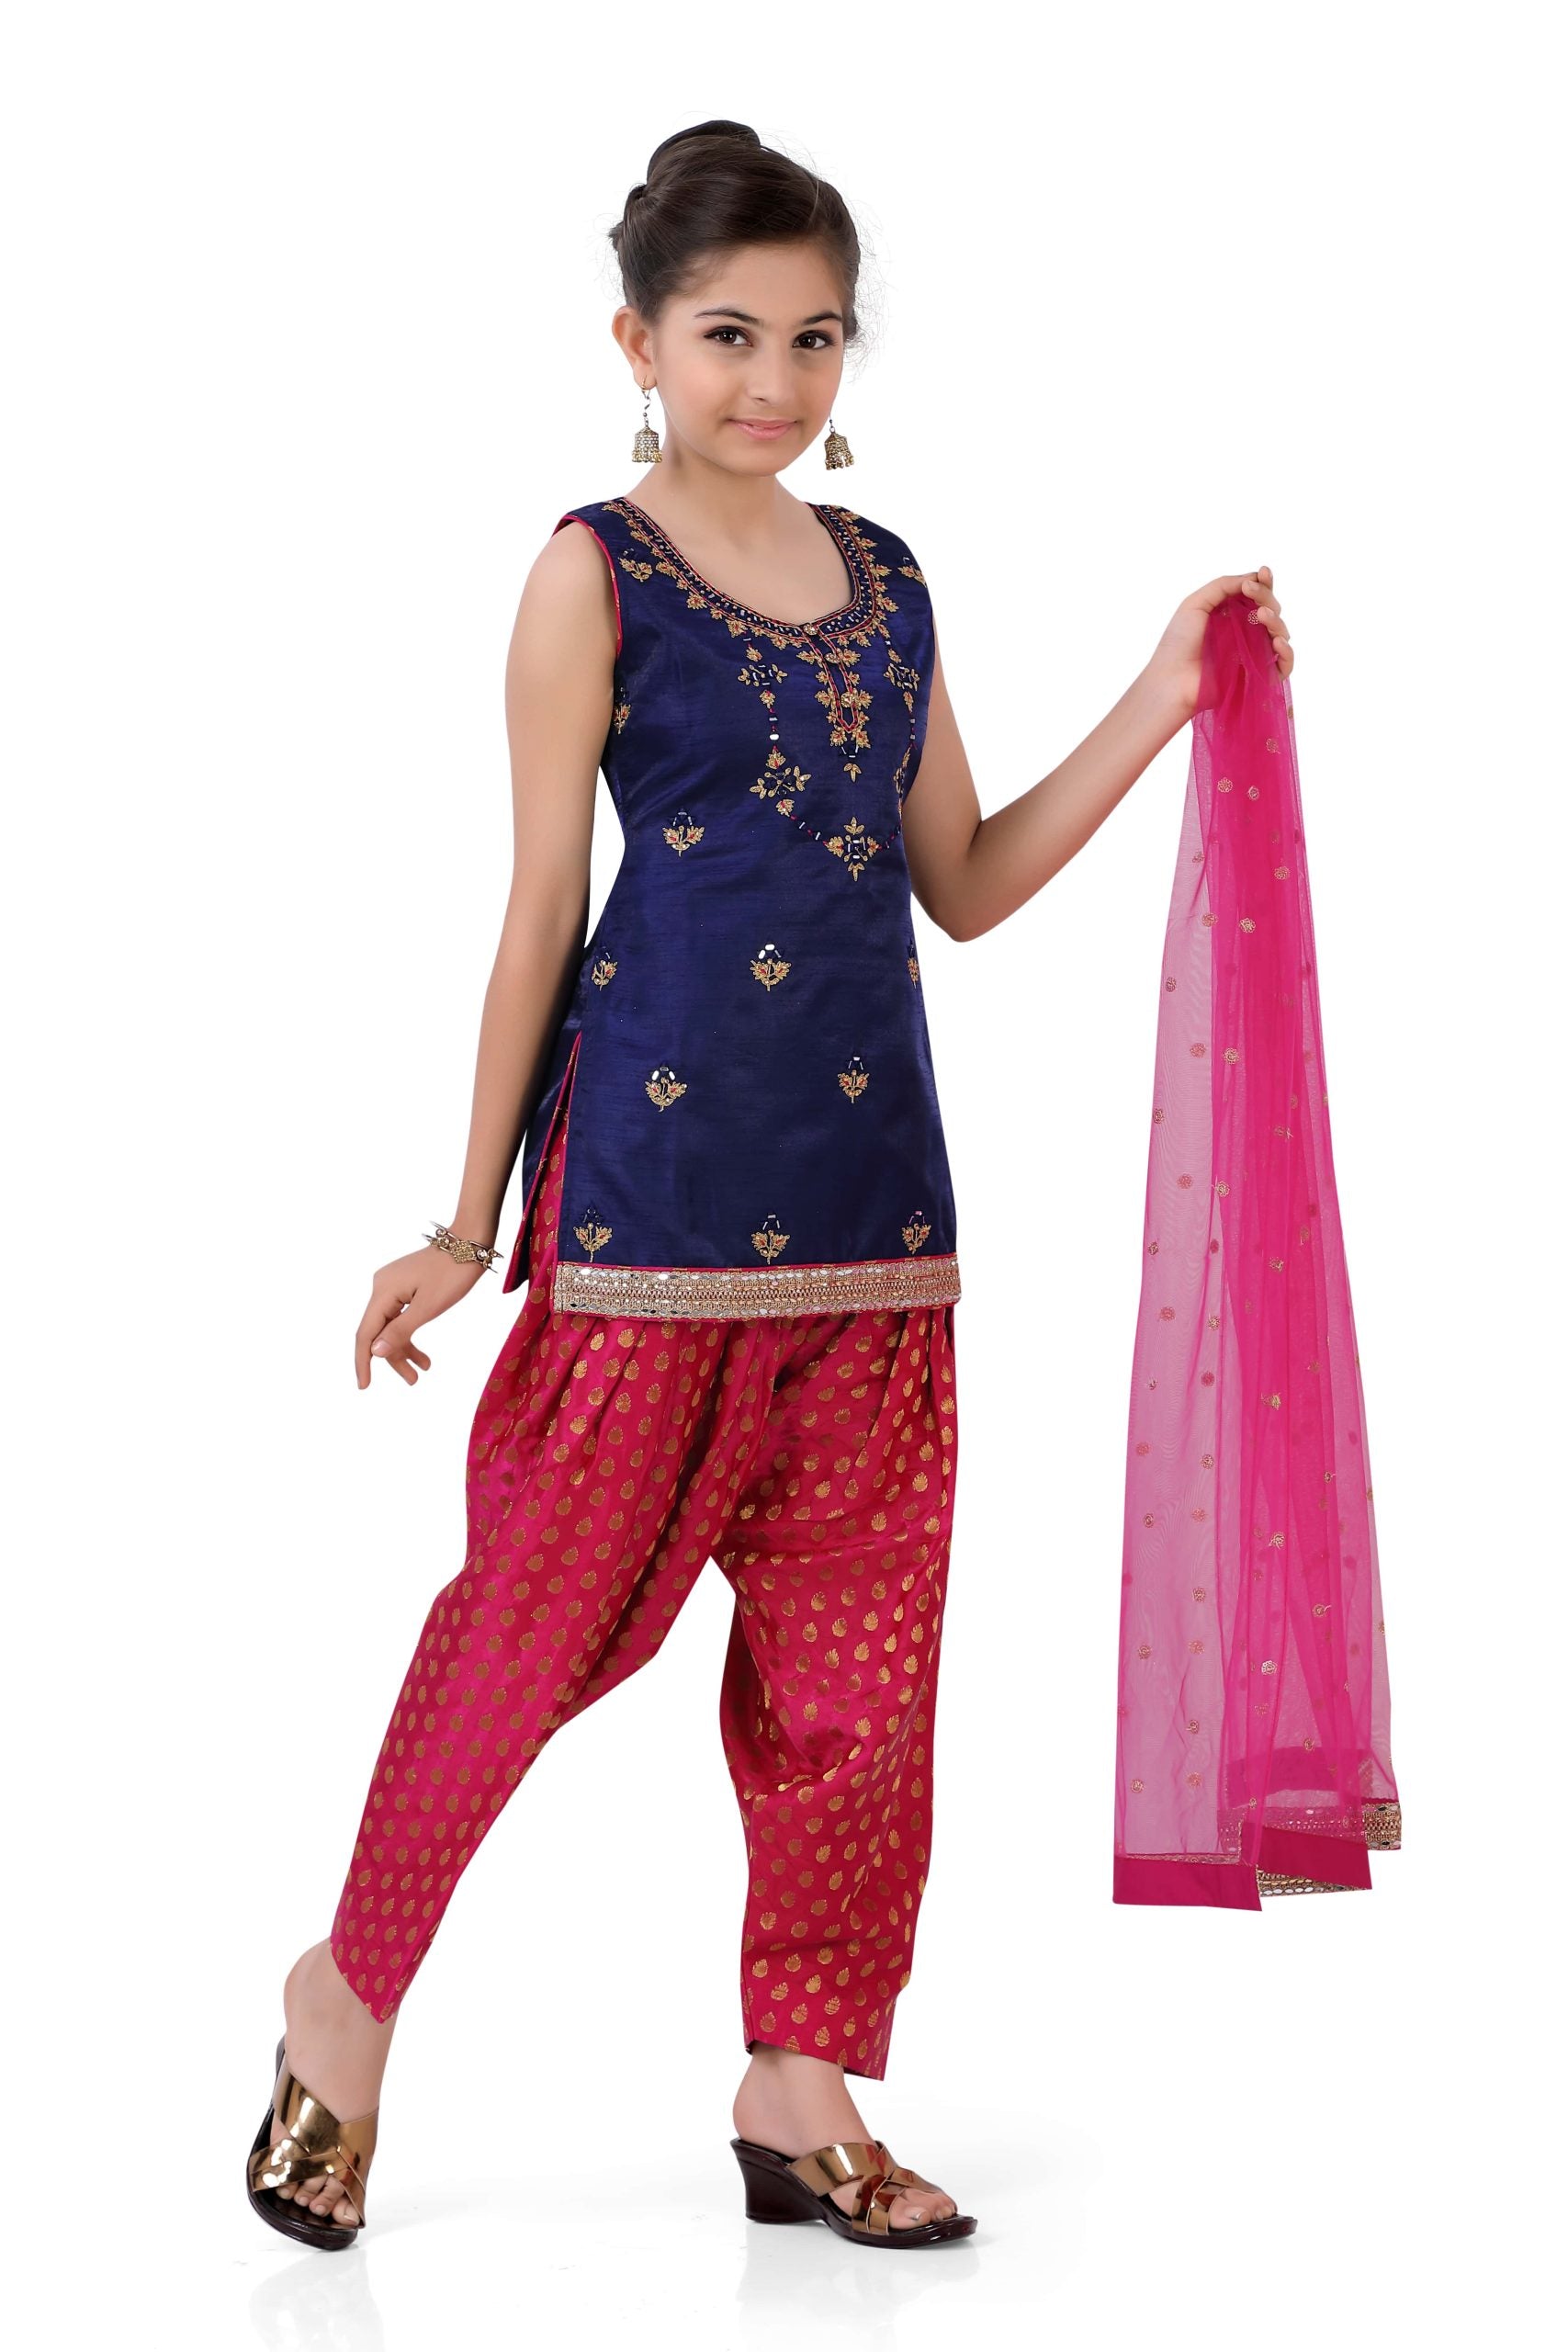 Black- Coloured Girl Suit with Patiyala Style Salwar and Dupatta with  Golden Lace works Pure Cotton